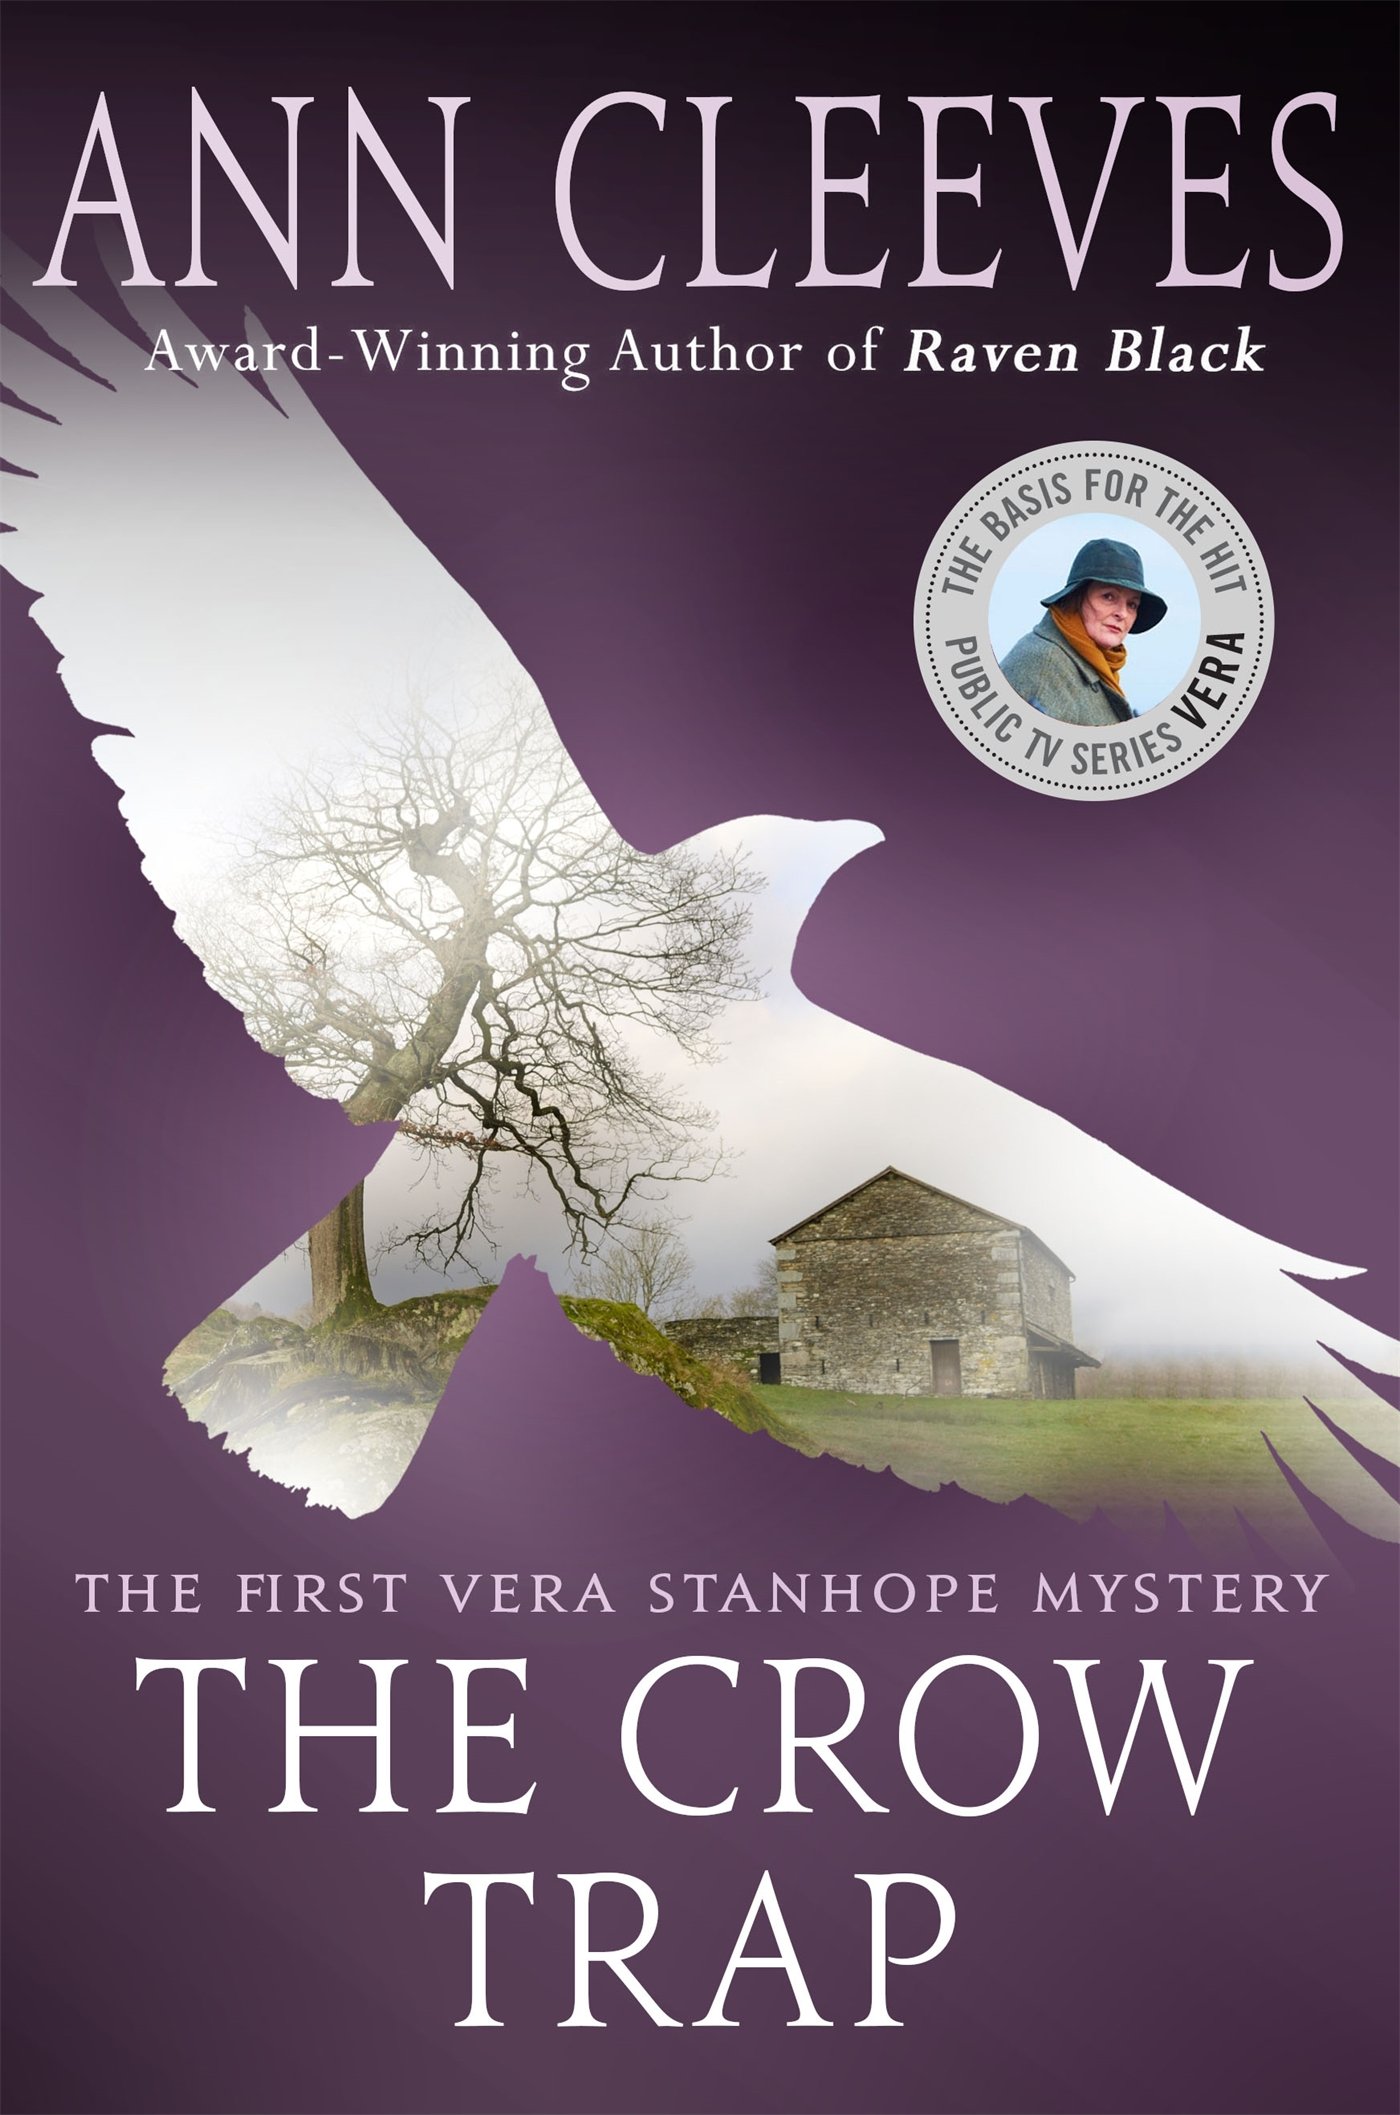 Book cover of Ann Cleeve's The Crow Trap